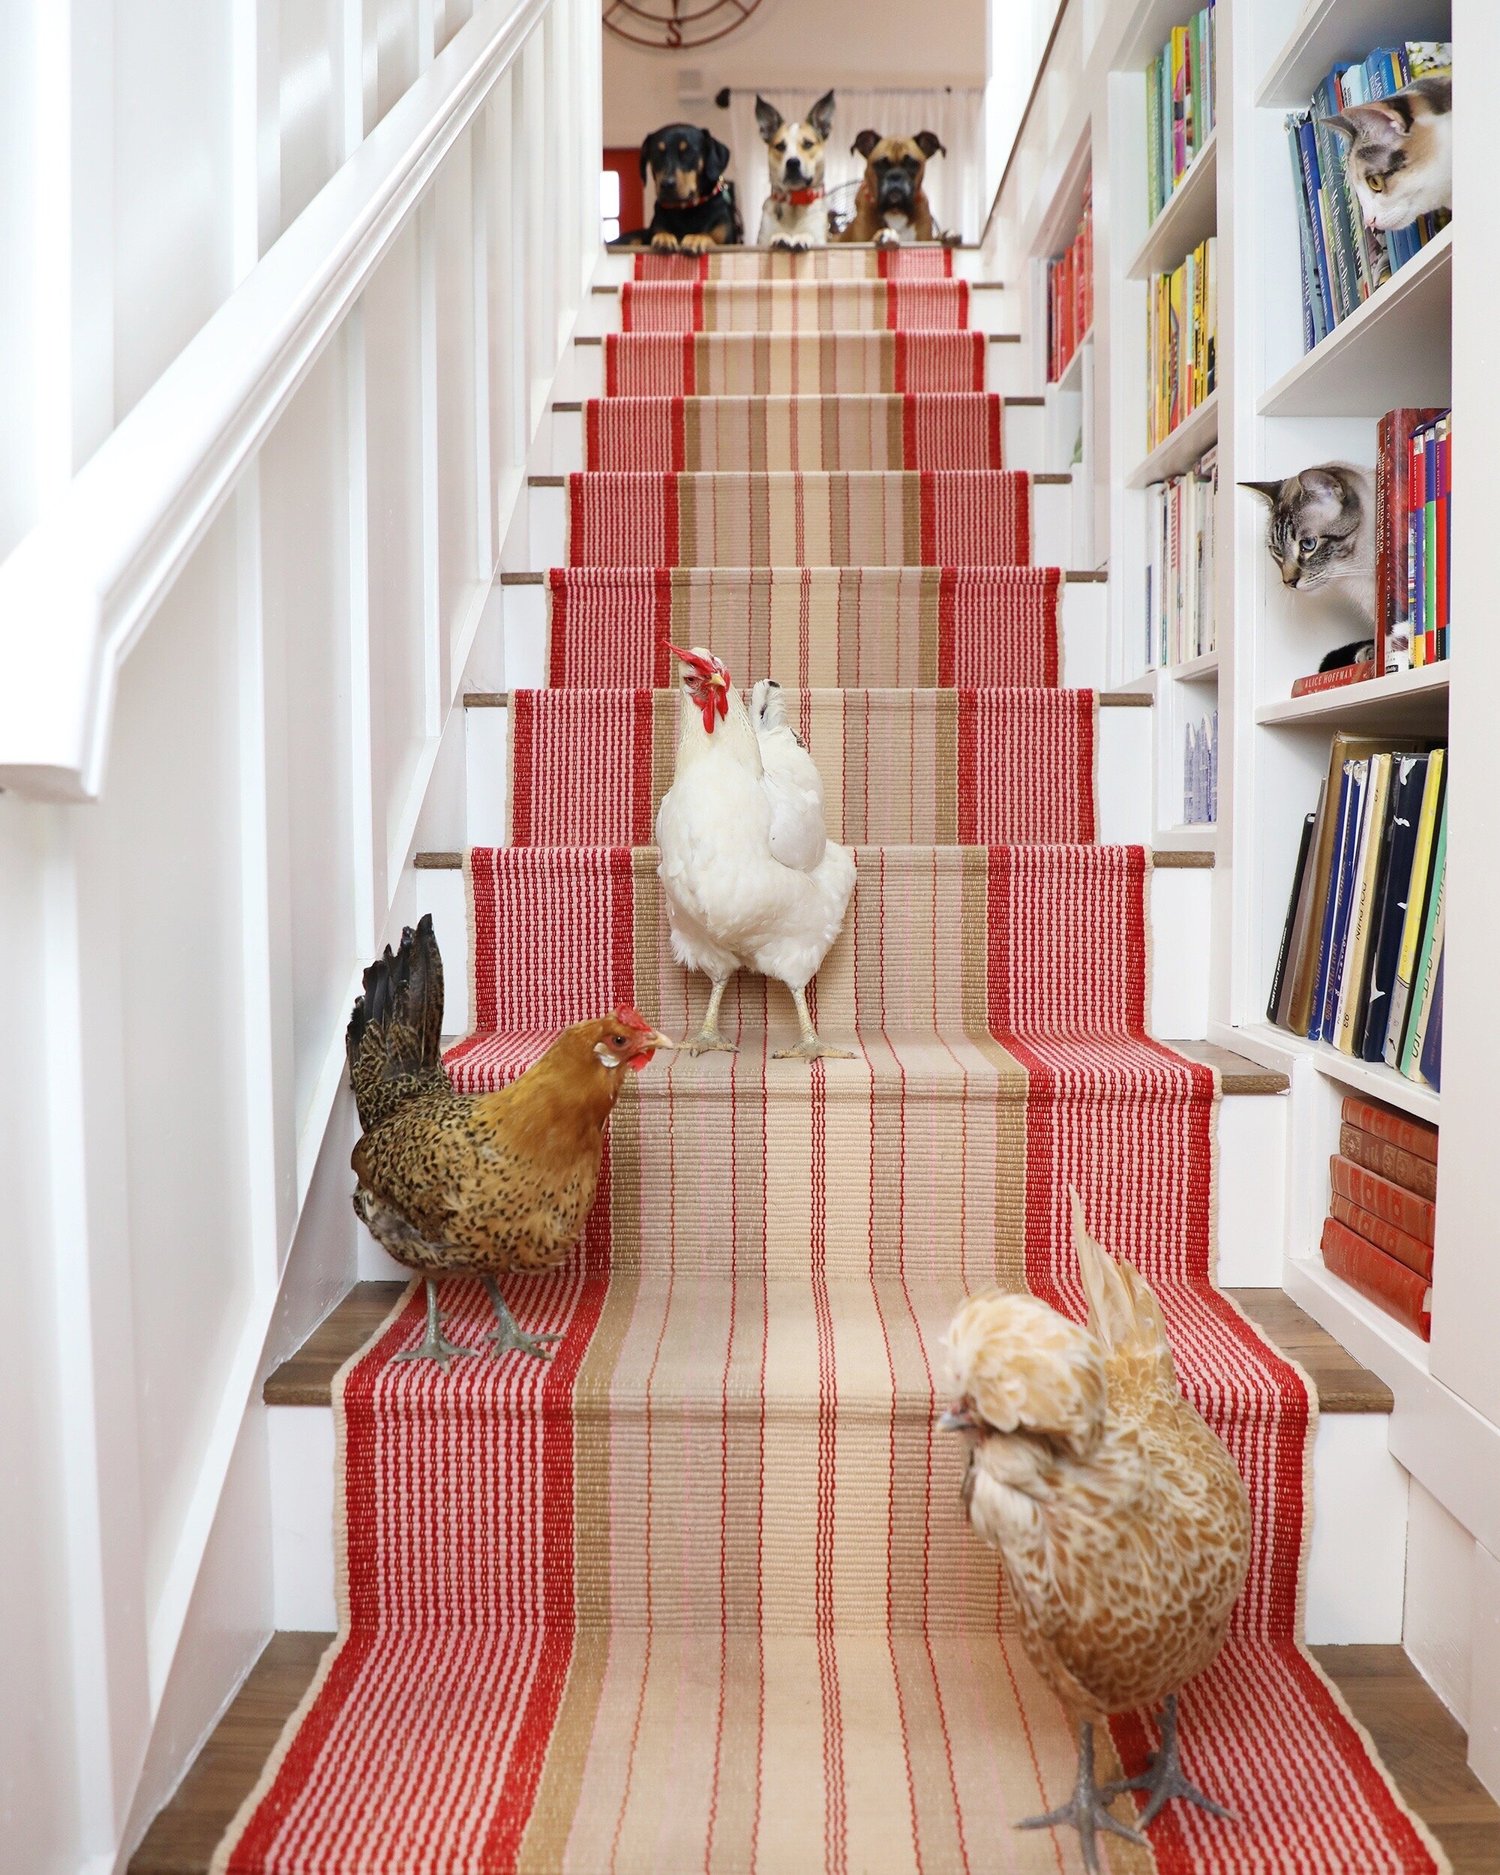 How to install a carpet runner on stairs - Cuckoo4Design